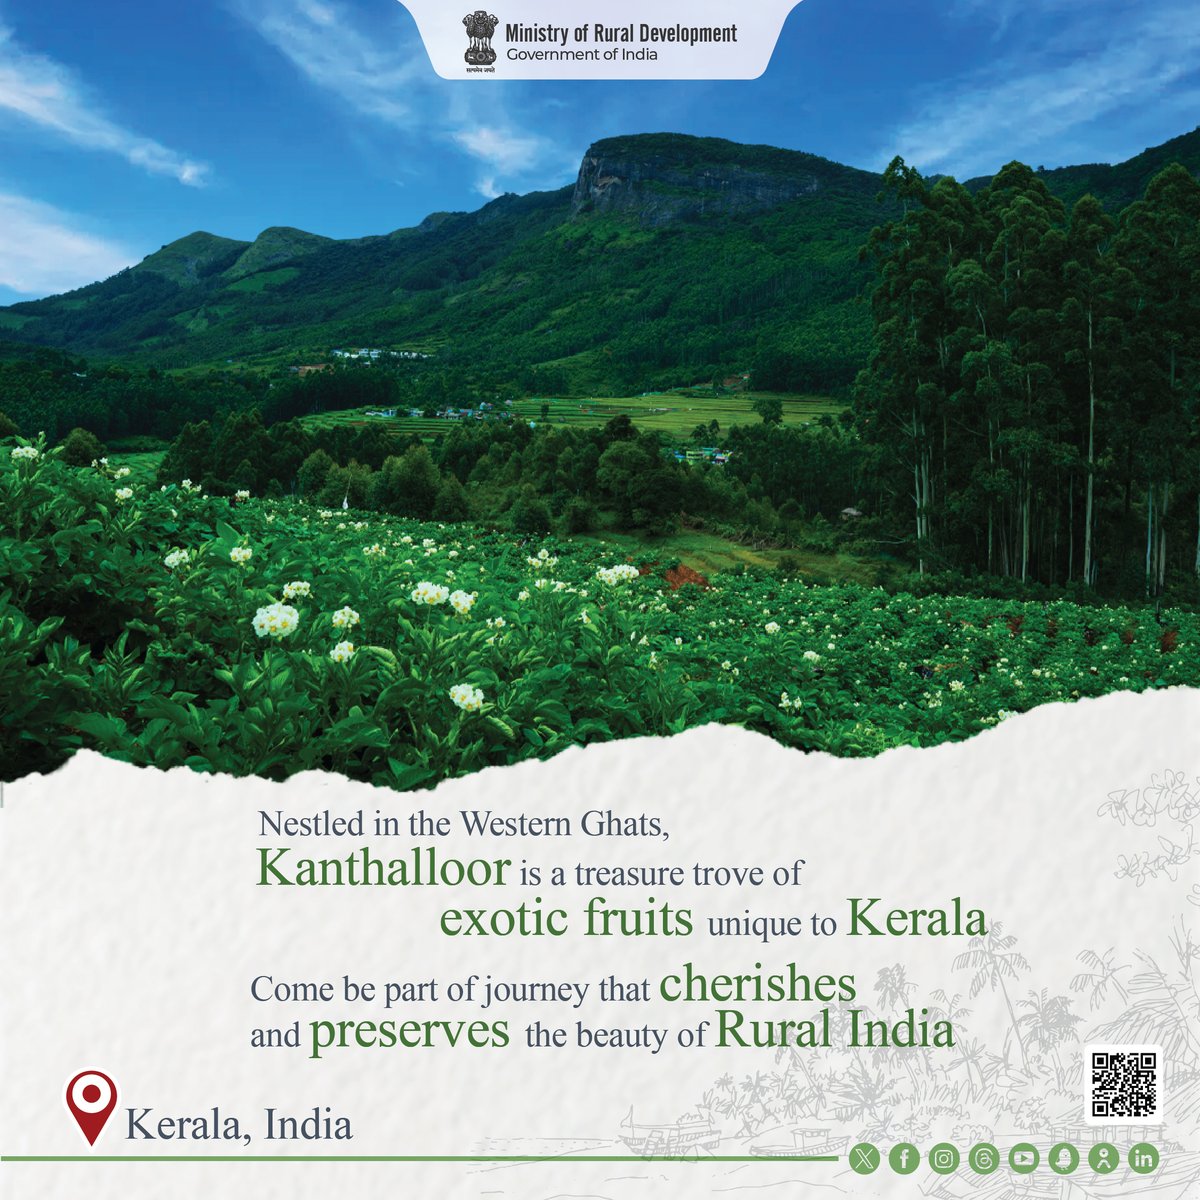 #EhsaasGrameenBharatKa | Embrace the allure of Kanthallor, where nature’s bounty meets tourism, creating an unforgettable #RuralTourism experience. This quaint and laid-back village nestled in the Western Ghats of India is renowned for its unique array of fruits. #MoRD #Kerala